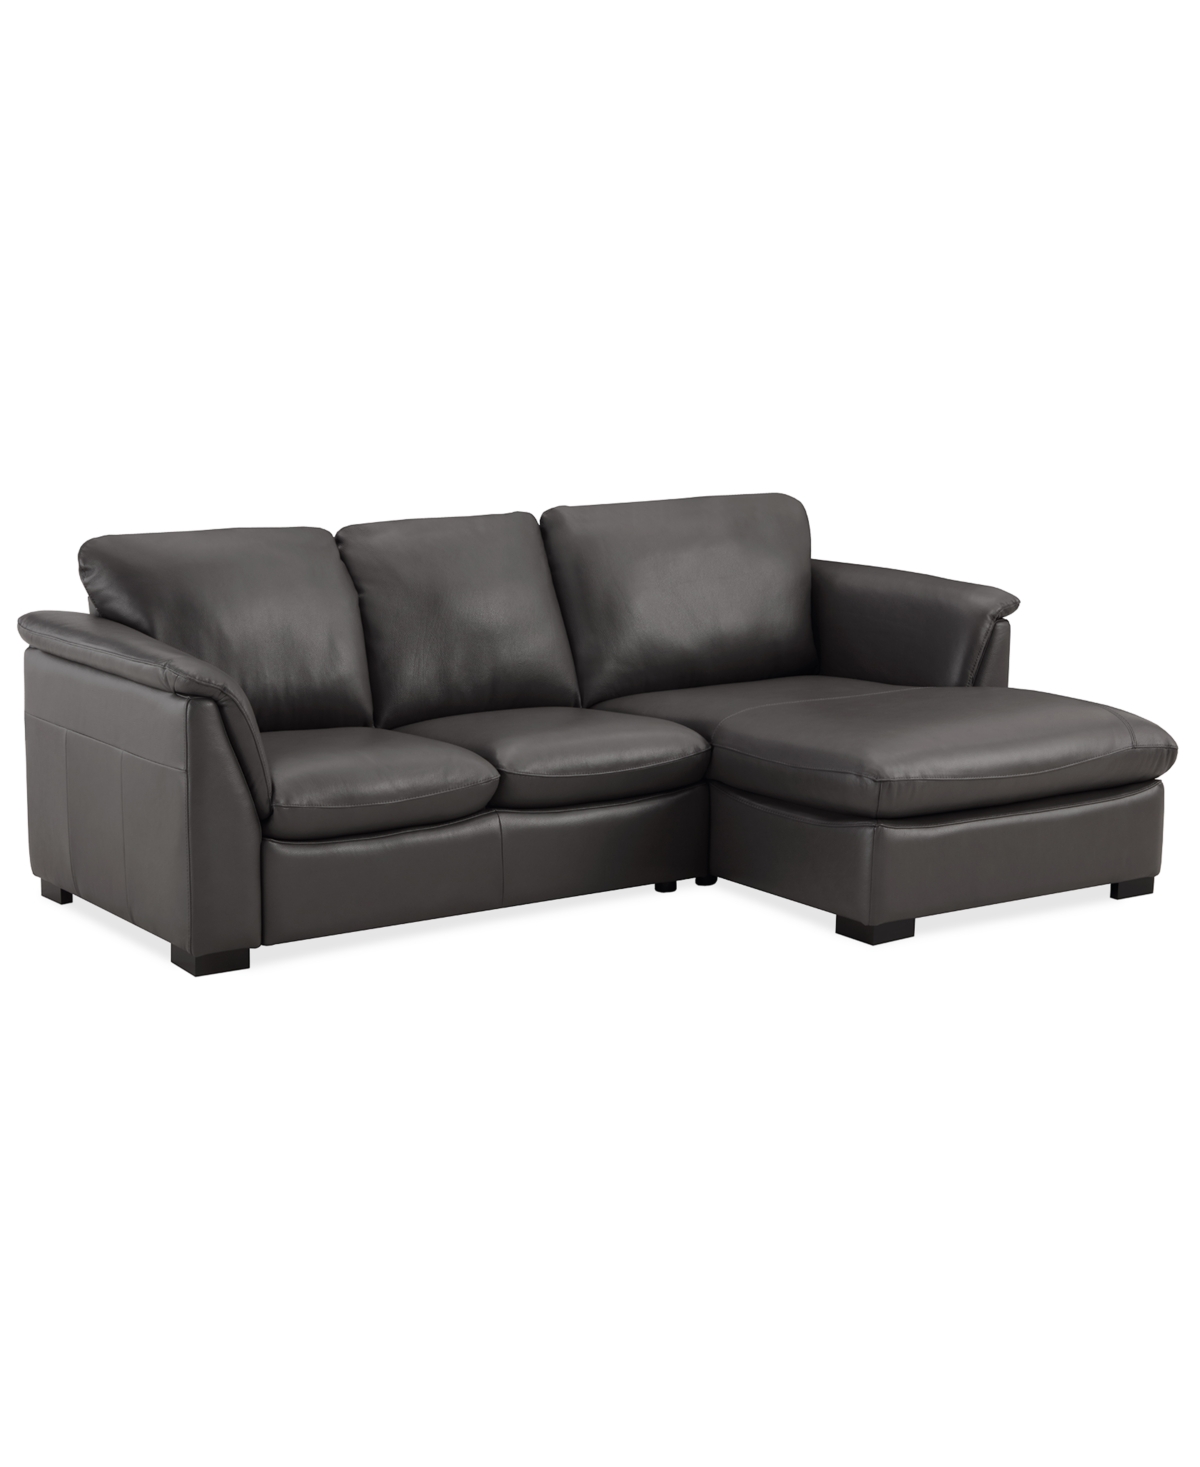 Furniture Arond 97" 2-pc. Leather Sectional With Chaise, Created For Macy's In Charcoal